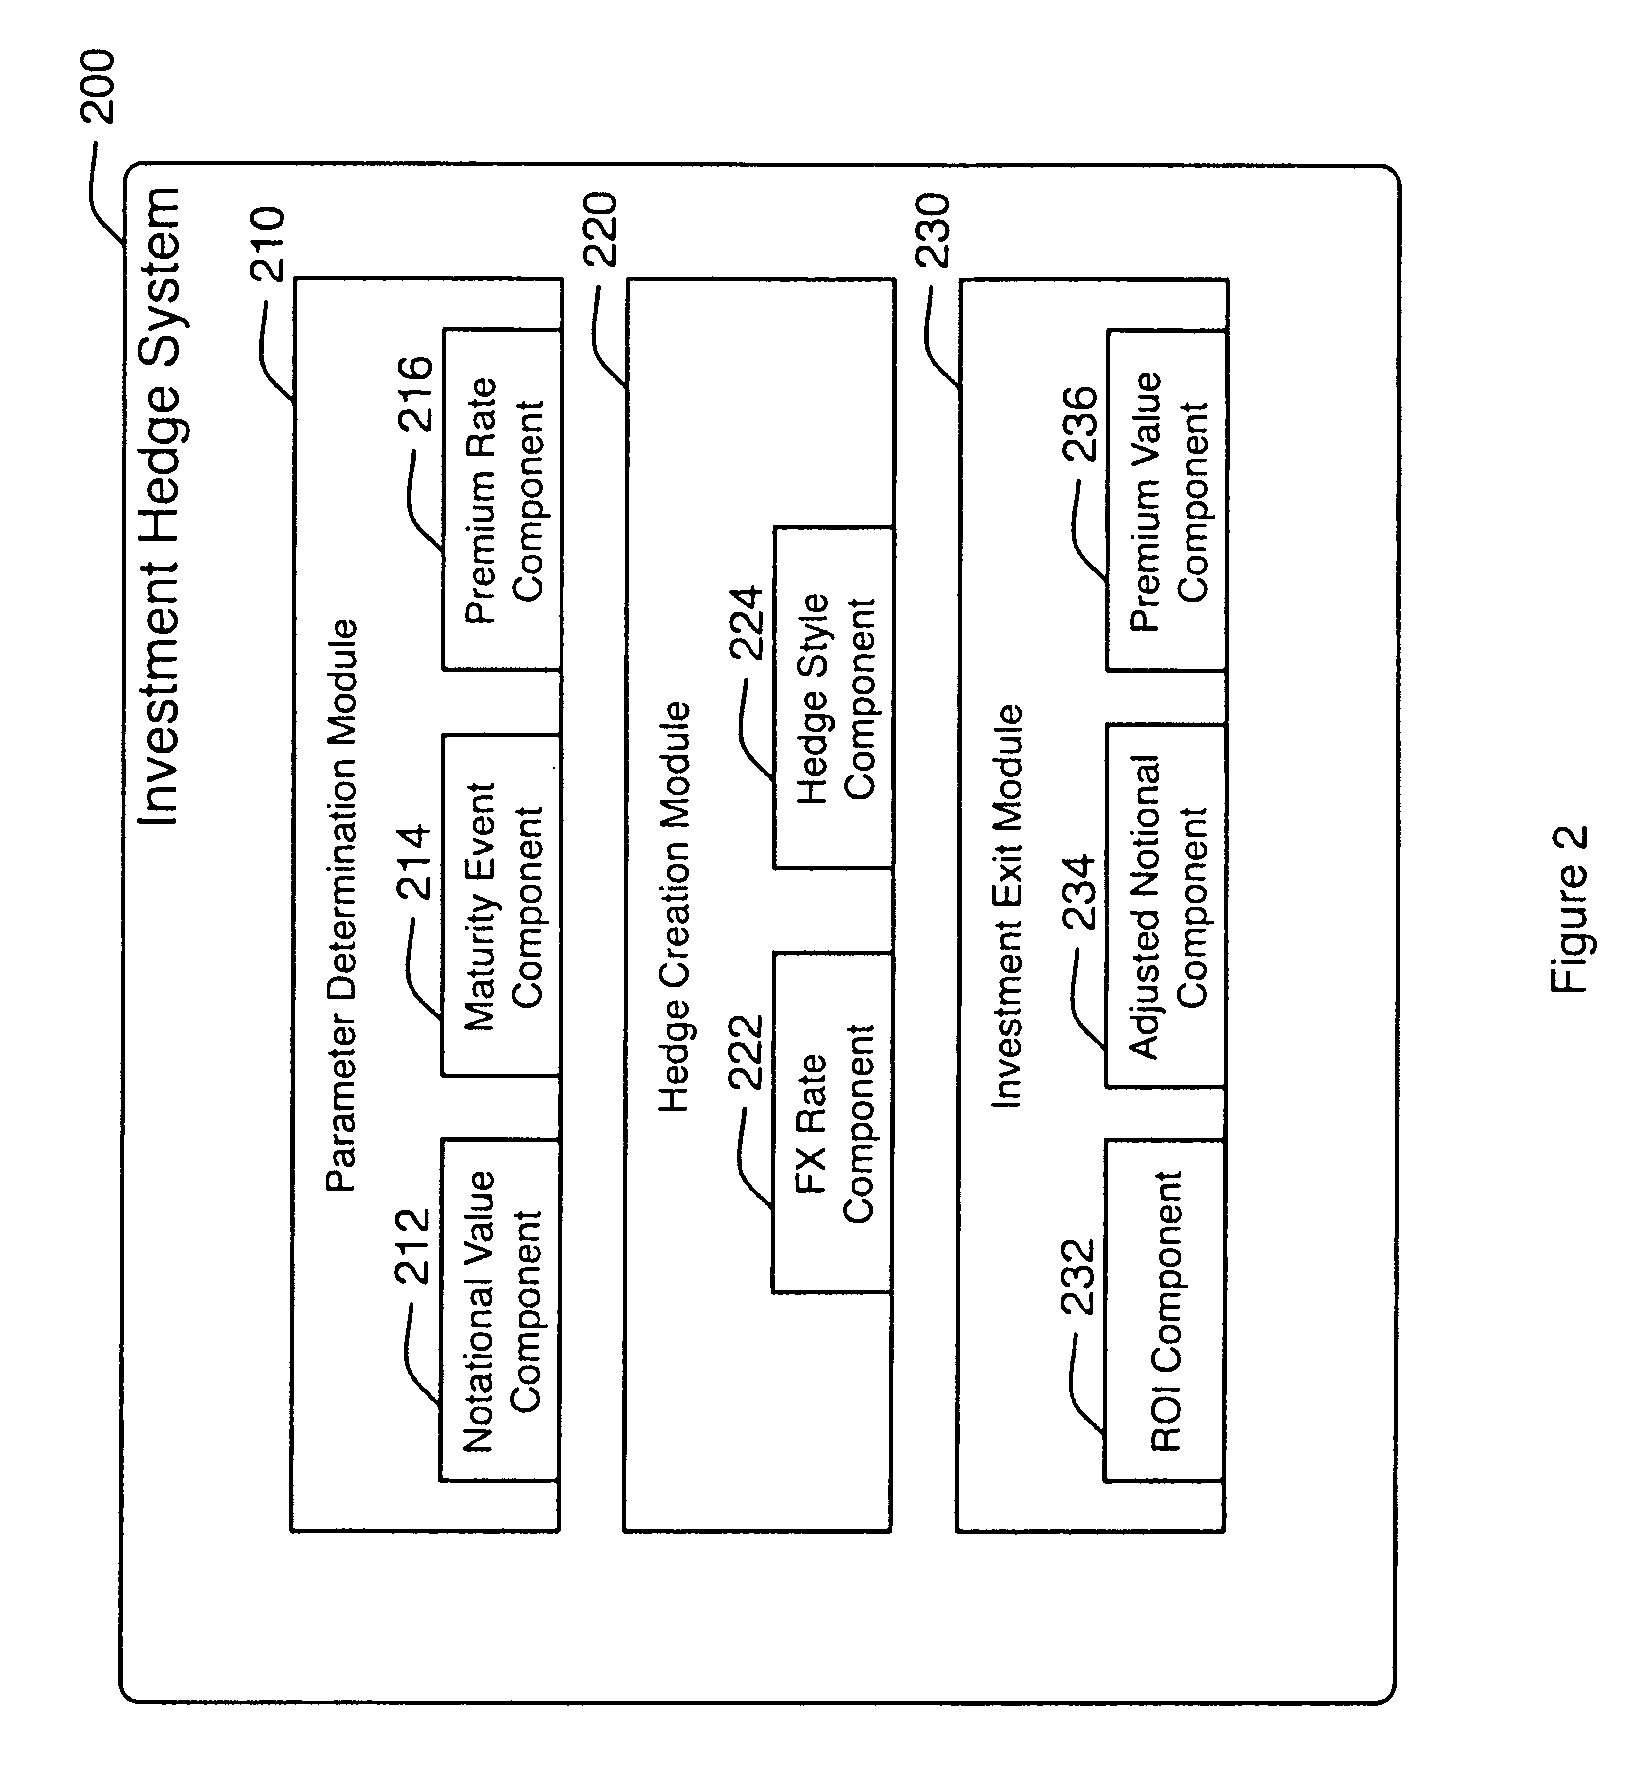 System and Method for Contingent Equity Return Forward to Hedge Foreign Exchange Risk in Investments Having Varying Exit Parameters